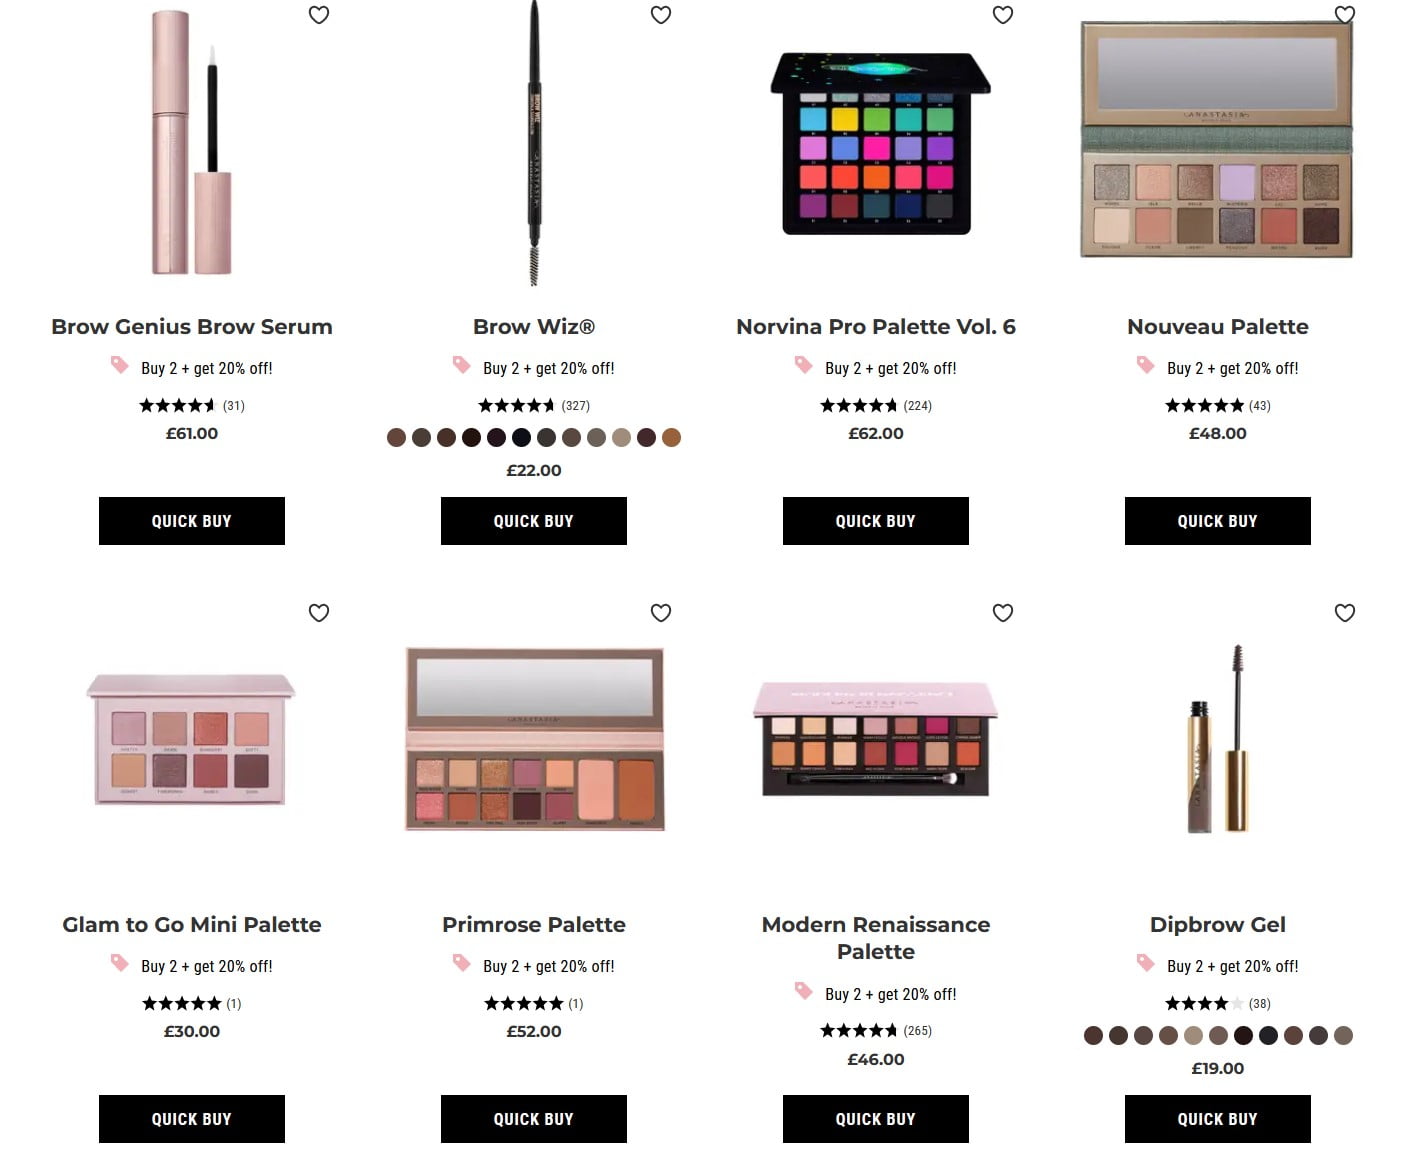 Buy any 2 products and save 20% (excludes kits, palettes & brows) at Anastasia Beverly Hills UK